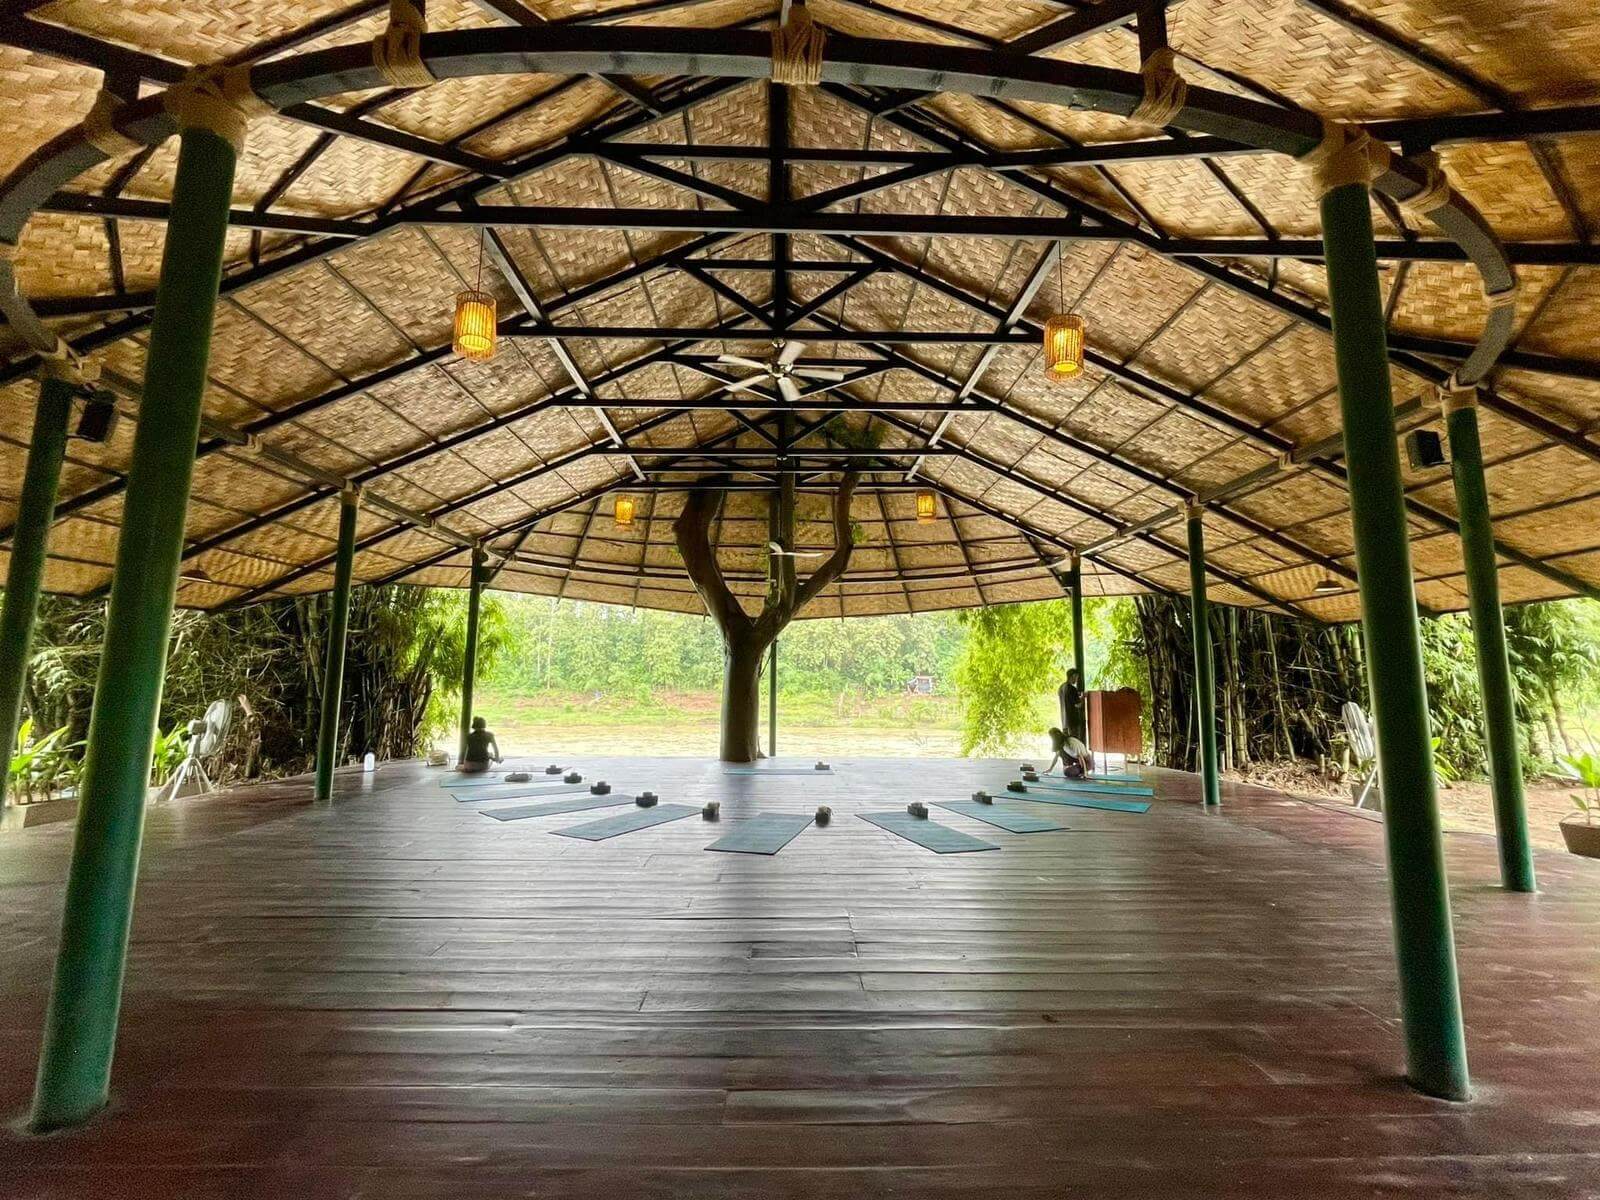 In the enchanting city of Luang Prabang, experience tranquility and serenity in our newly renovated yoga room with a graceful wooden floor, surrounded by the soothing presence of a majestic